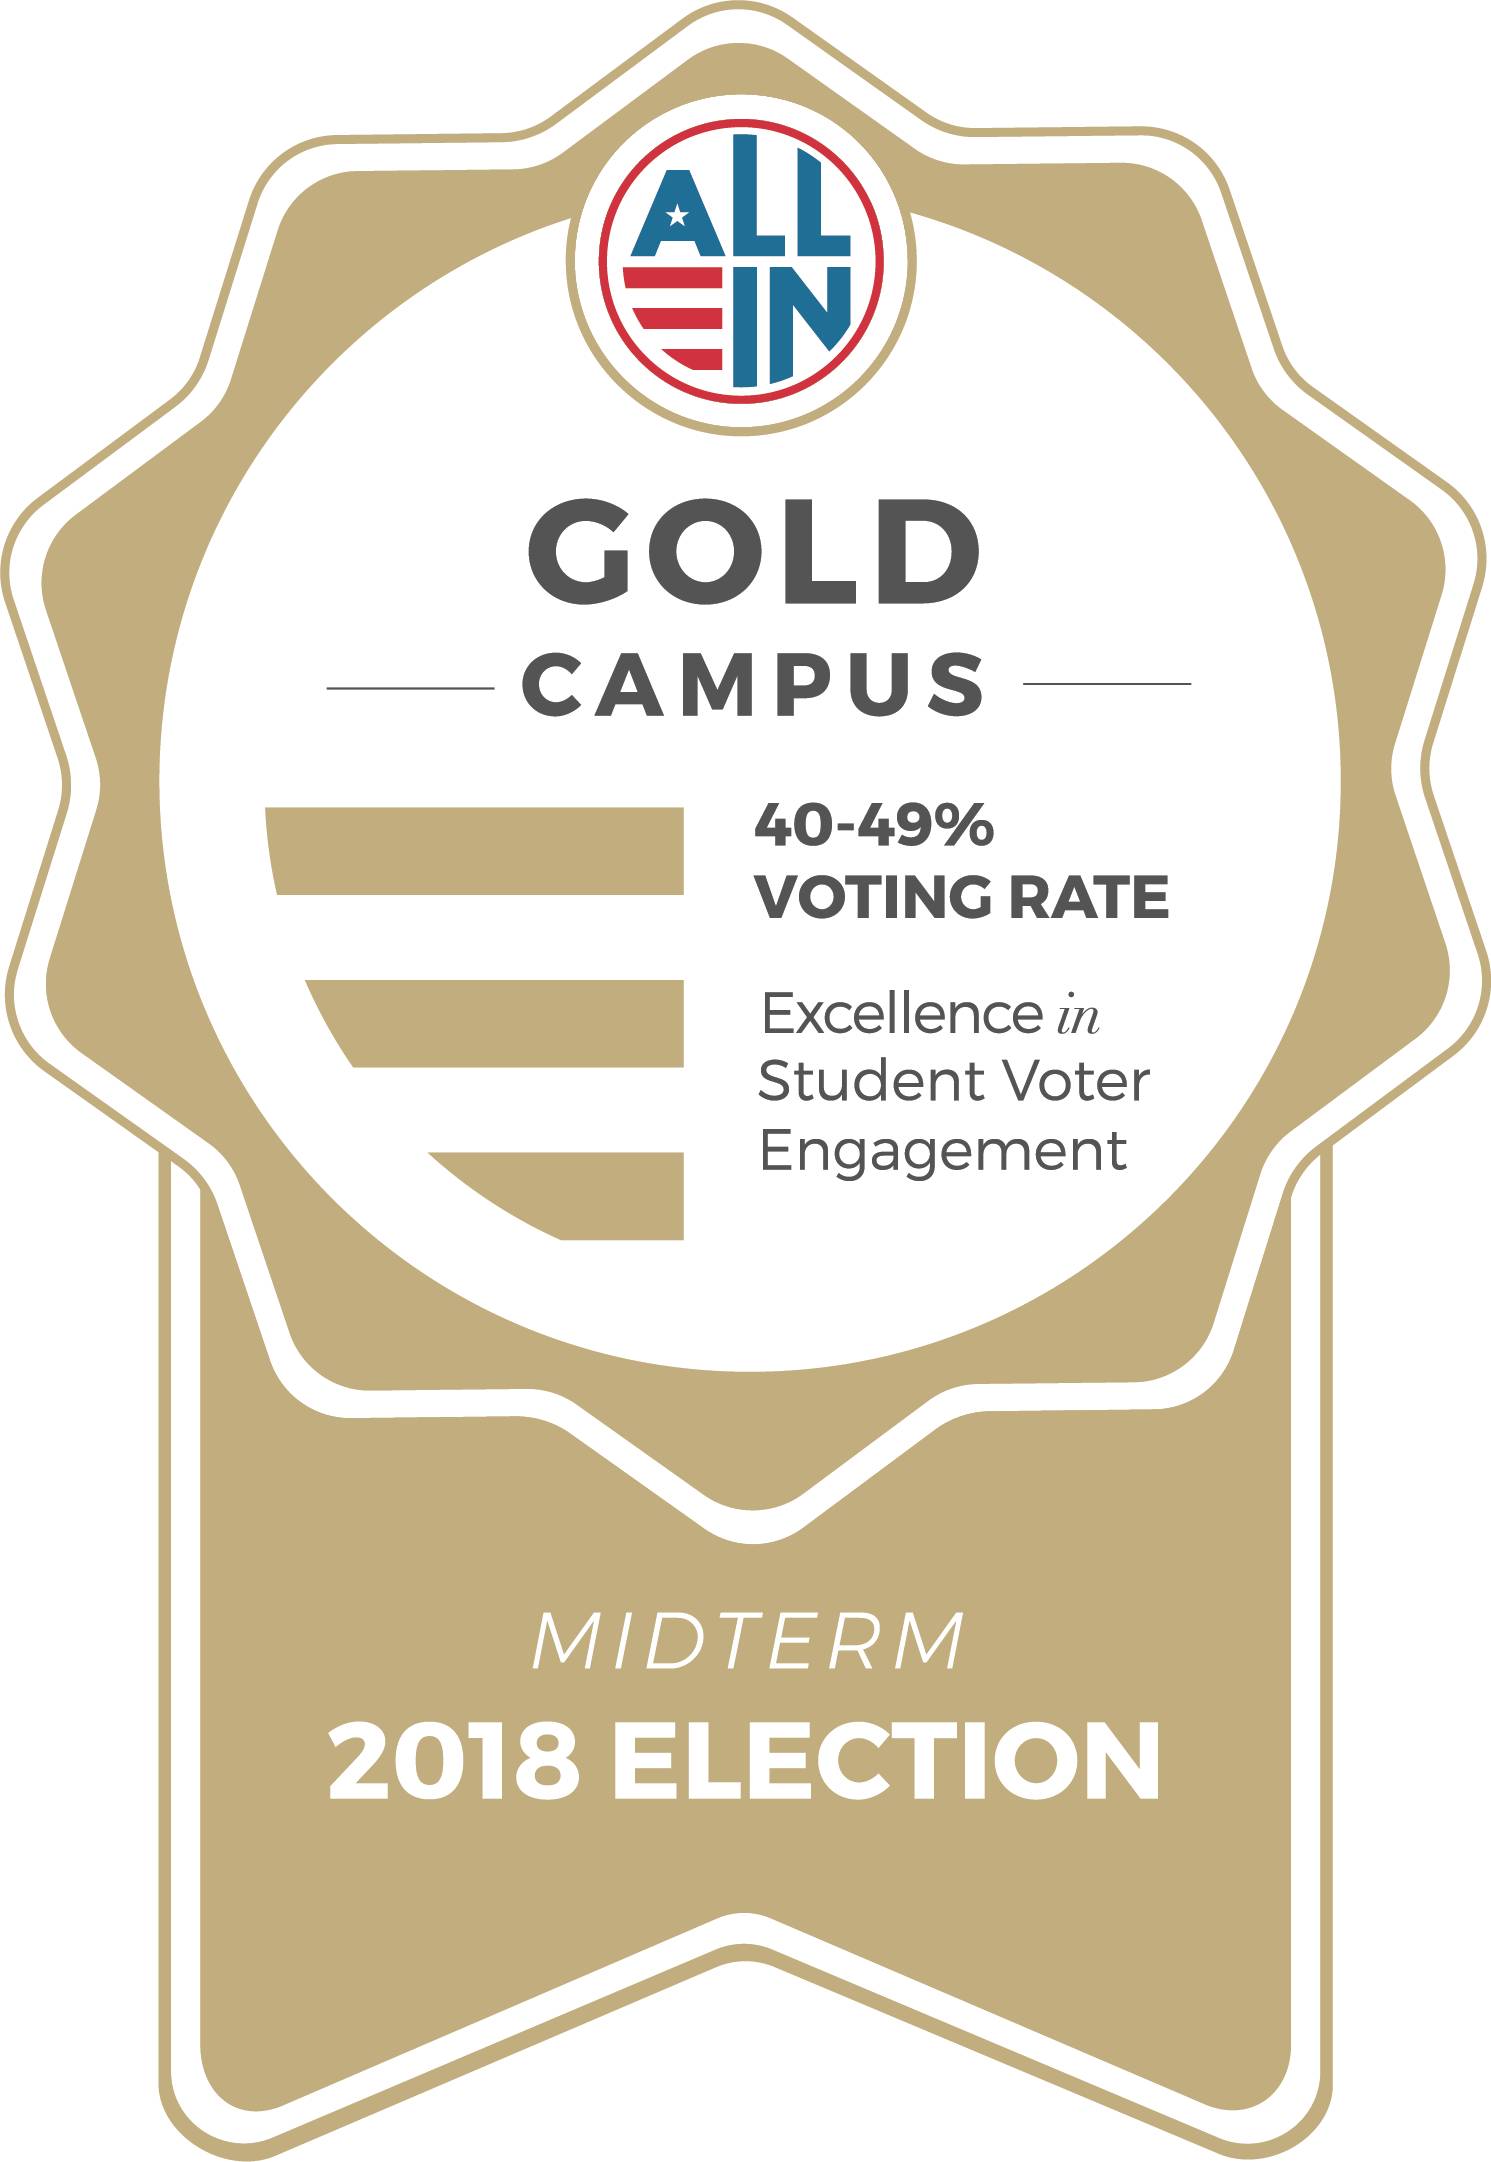 2018 Midterm Election "Gold Campus"